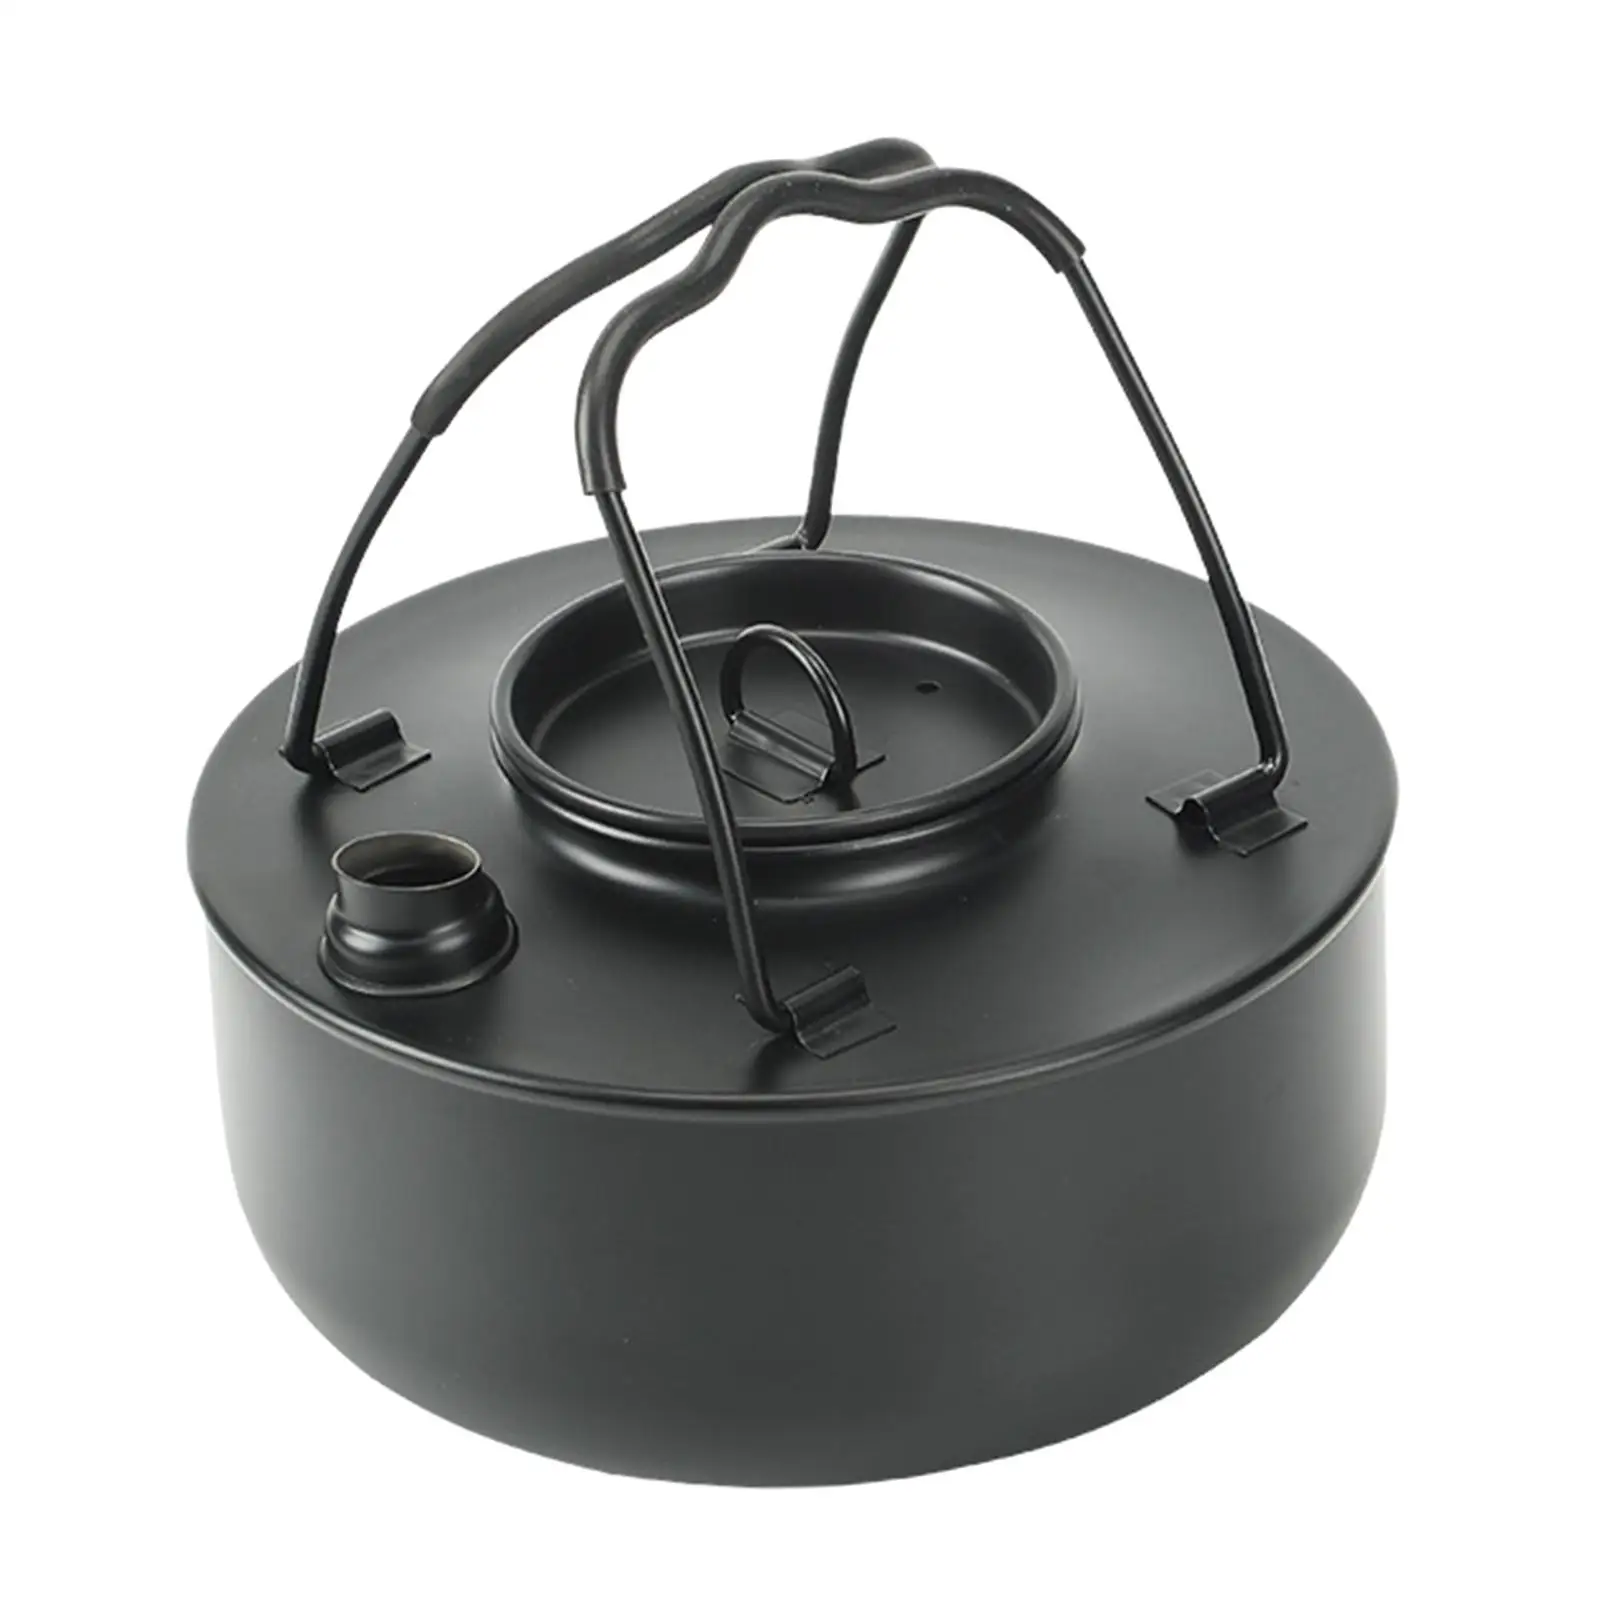 Camping Kettle Teapot Water Boiler Backpack Outdoor Stove Pot for 